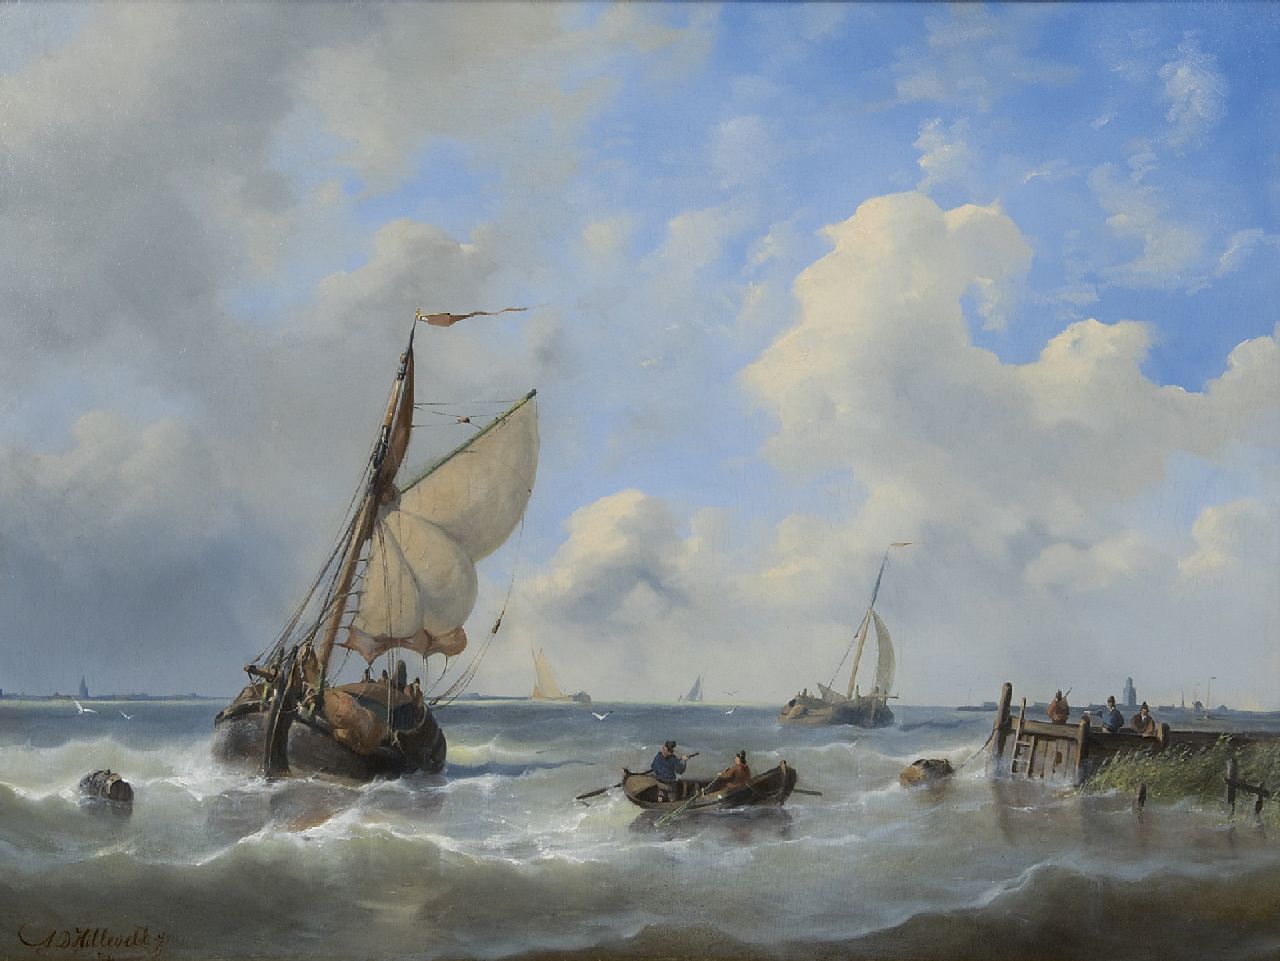 Hilleveld A.D.  | Adrianus David Hilleveld | Paintings offered for sale | Sailing vessels off the coast near a jetty, oil on panel 43.1 x 56.5 cm, signed l.l. and dated '54